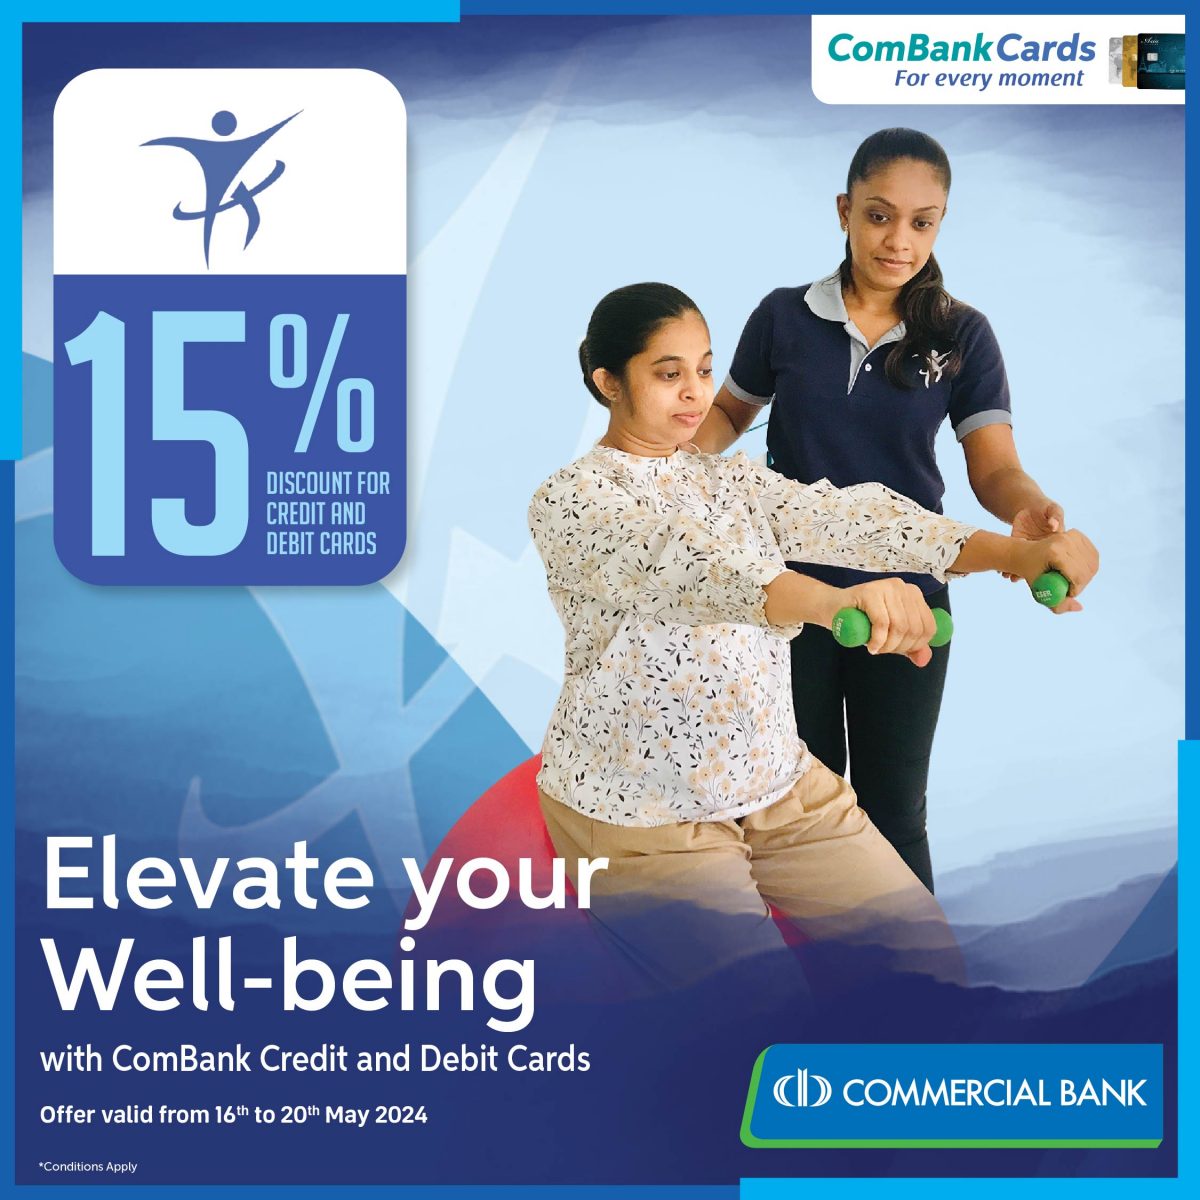 Turn Every Moment into Wellness with your Com Bank Cards